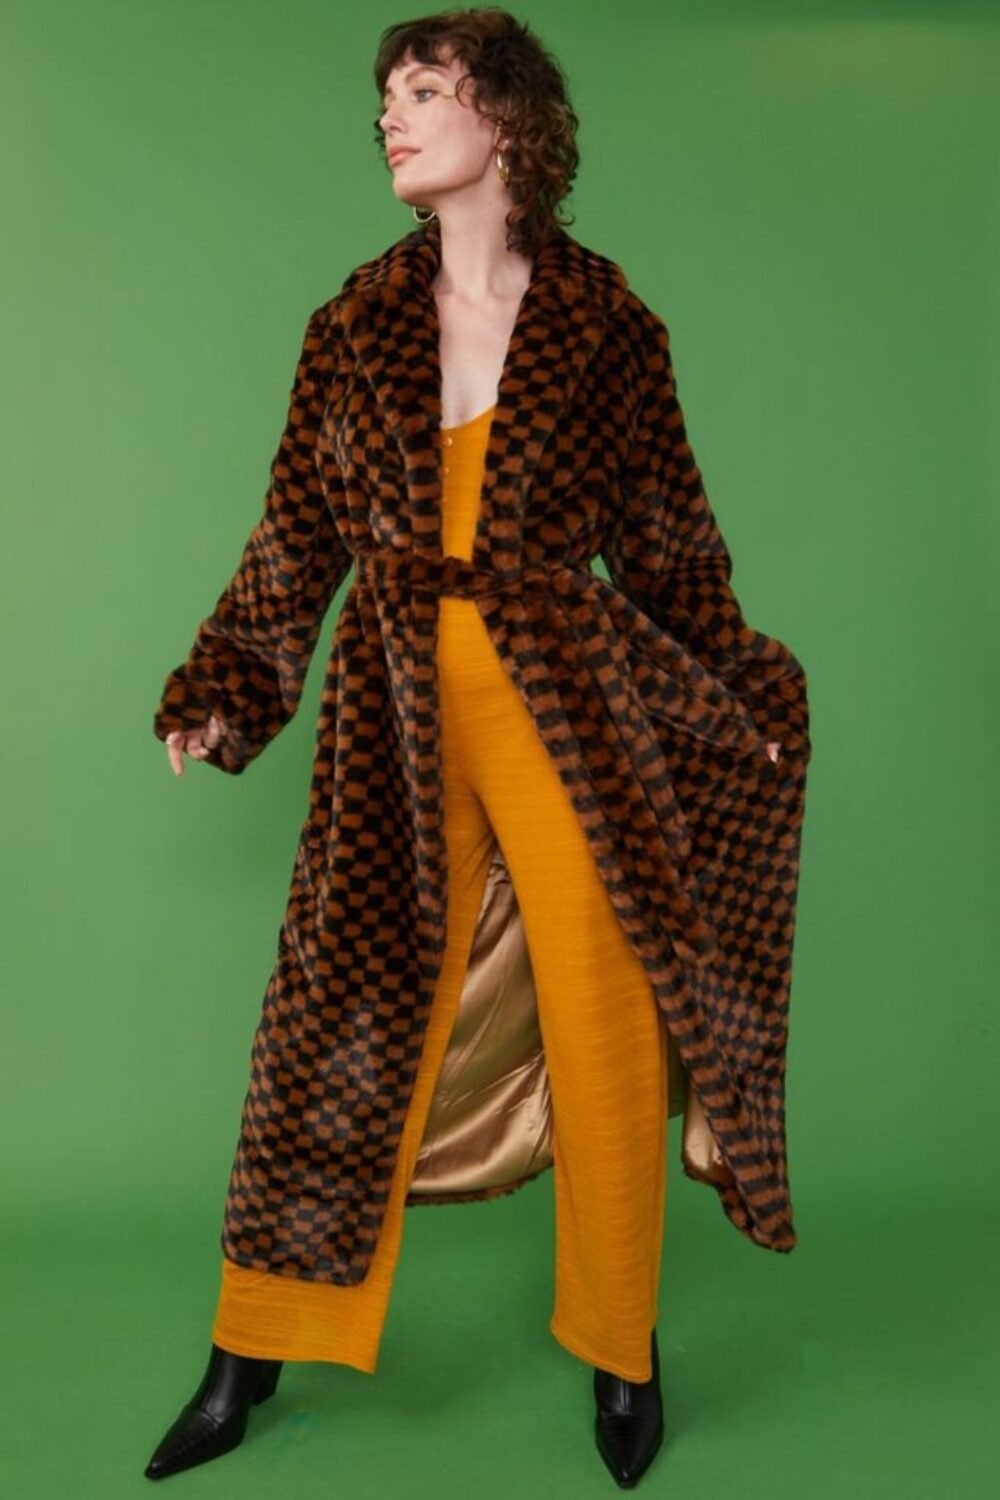 Shop Lux Faux Fur Mini Checkered Maxi Coat in Orange and Black and women's luxury and designer clothes at www.lux-apparel.co.uk